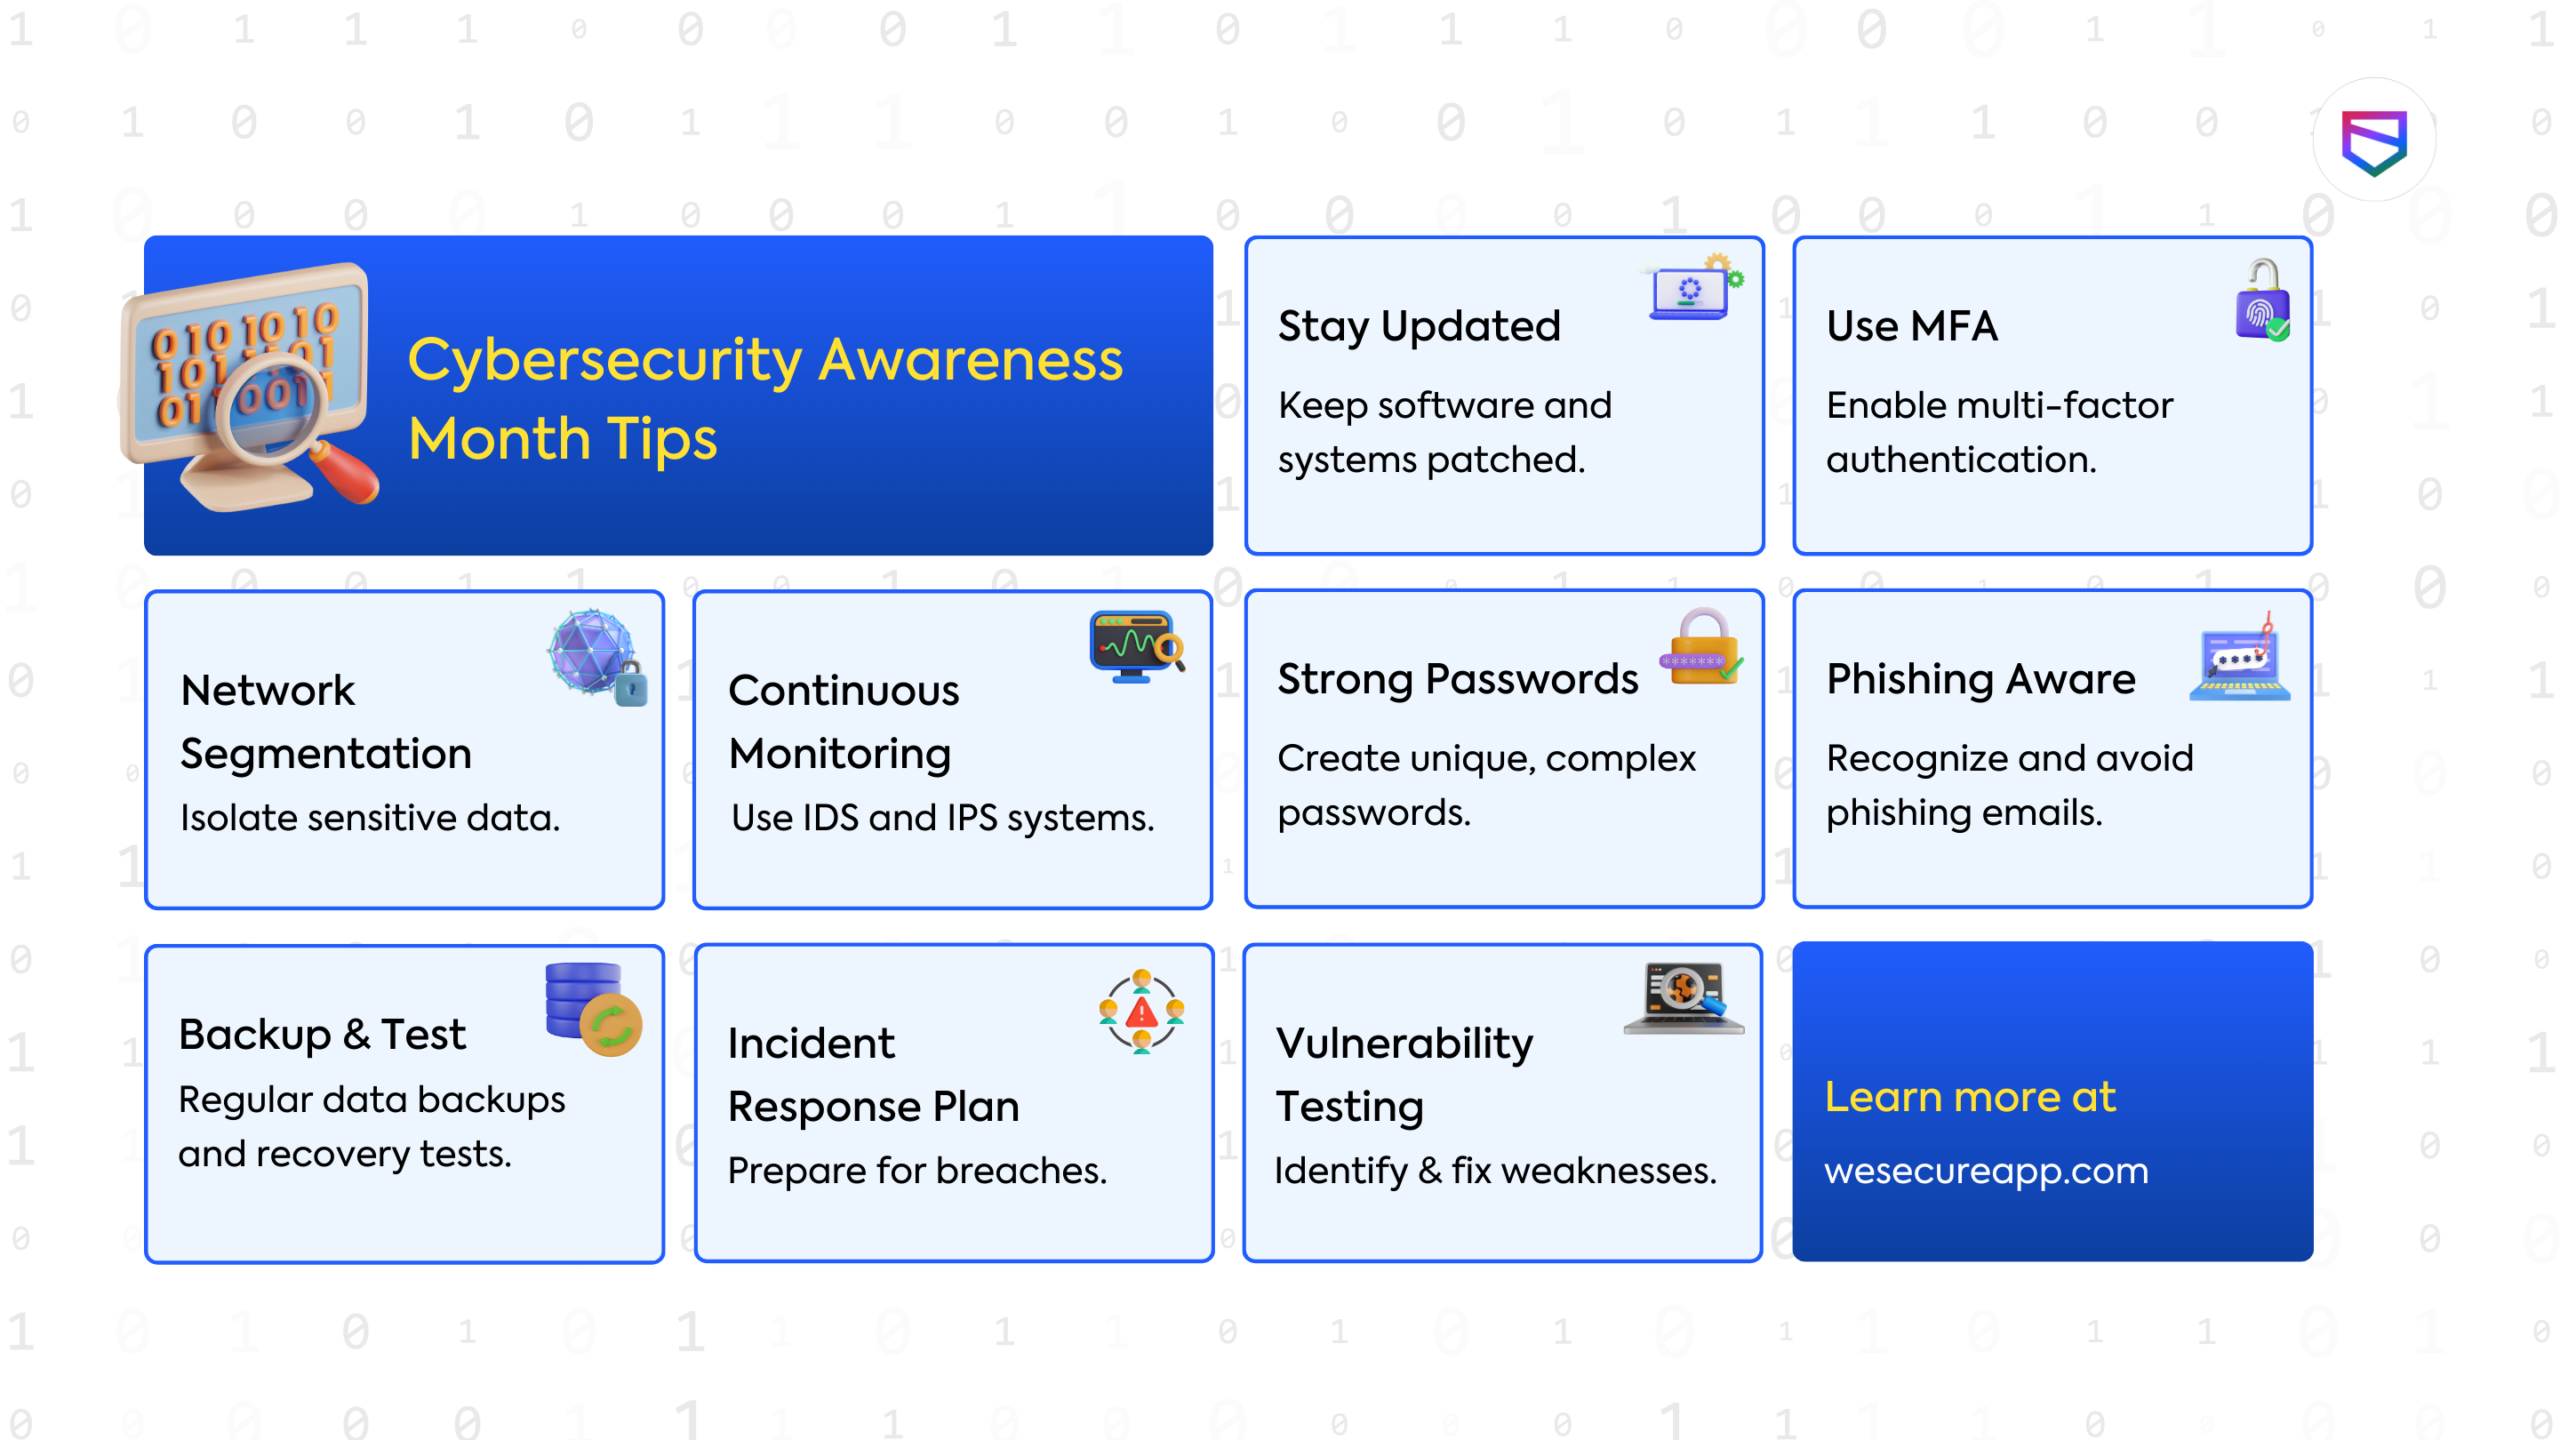 Cybersecurity Awareness Month Tips